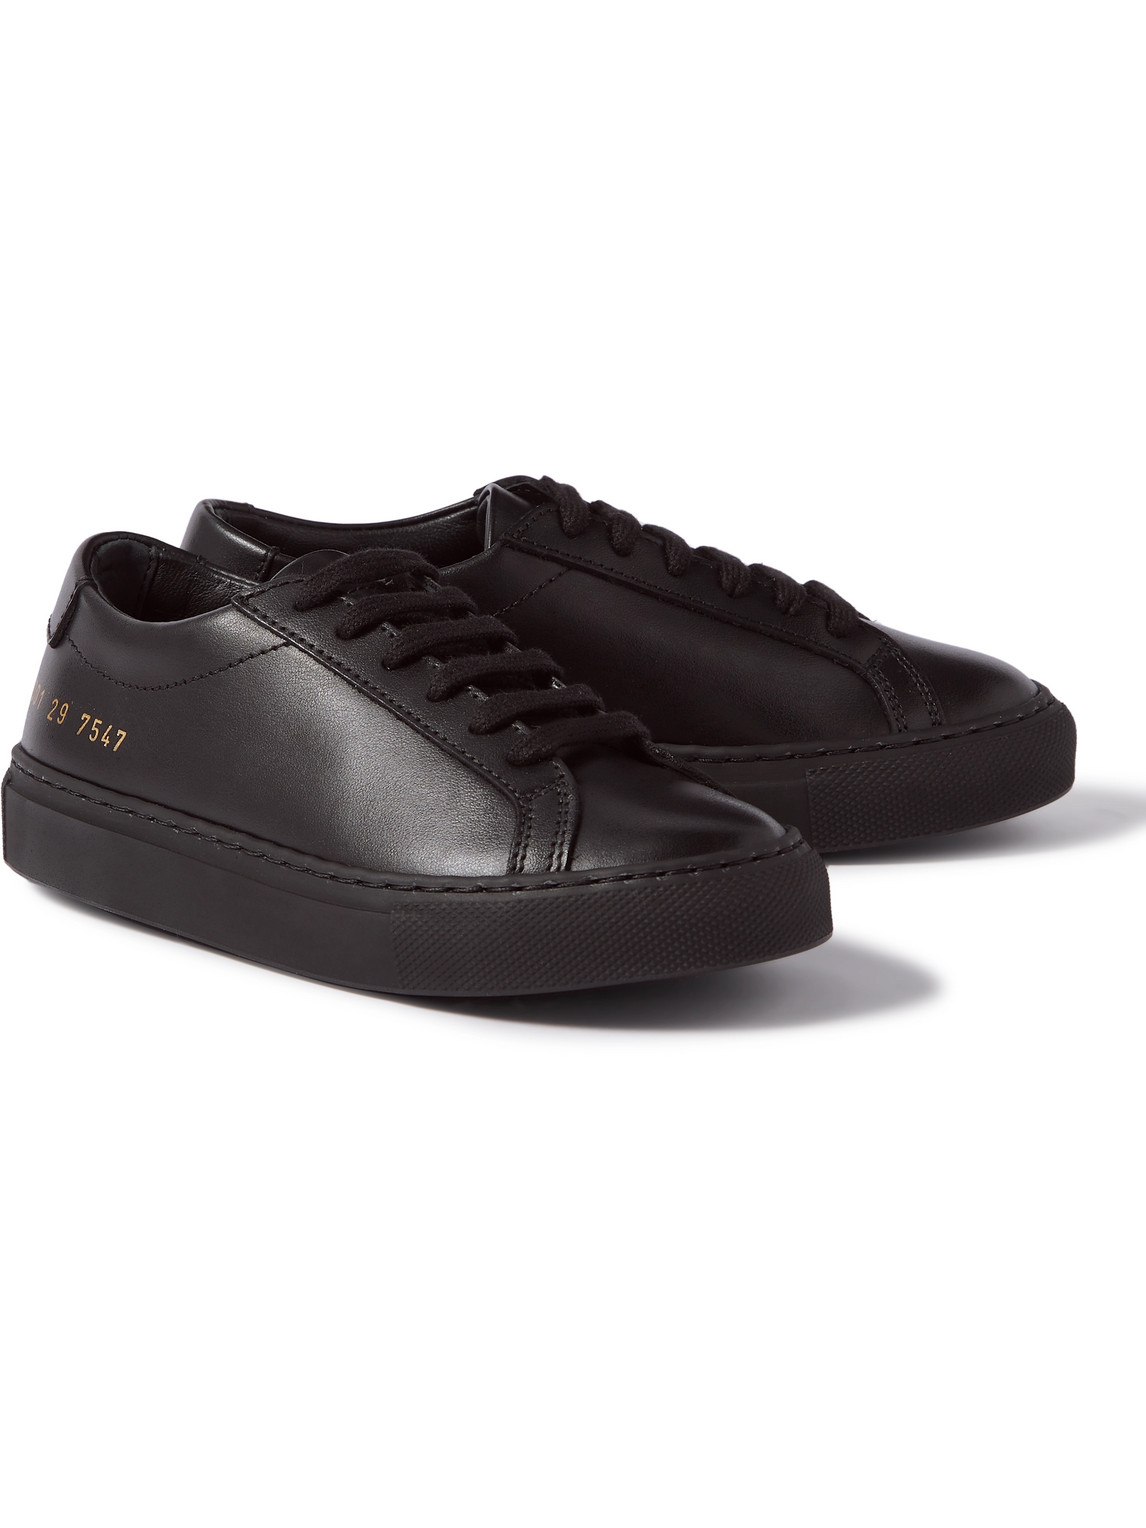 COMMON PROJECTS ORIGINAL ACHILLES LEATHER SNEAKERS